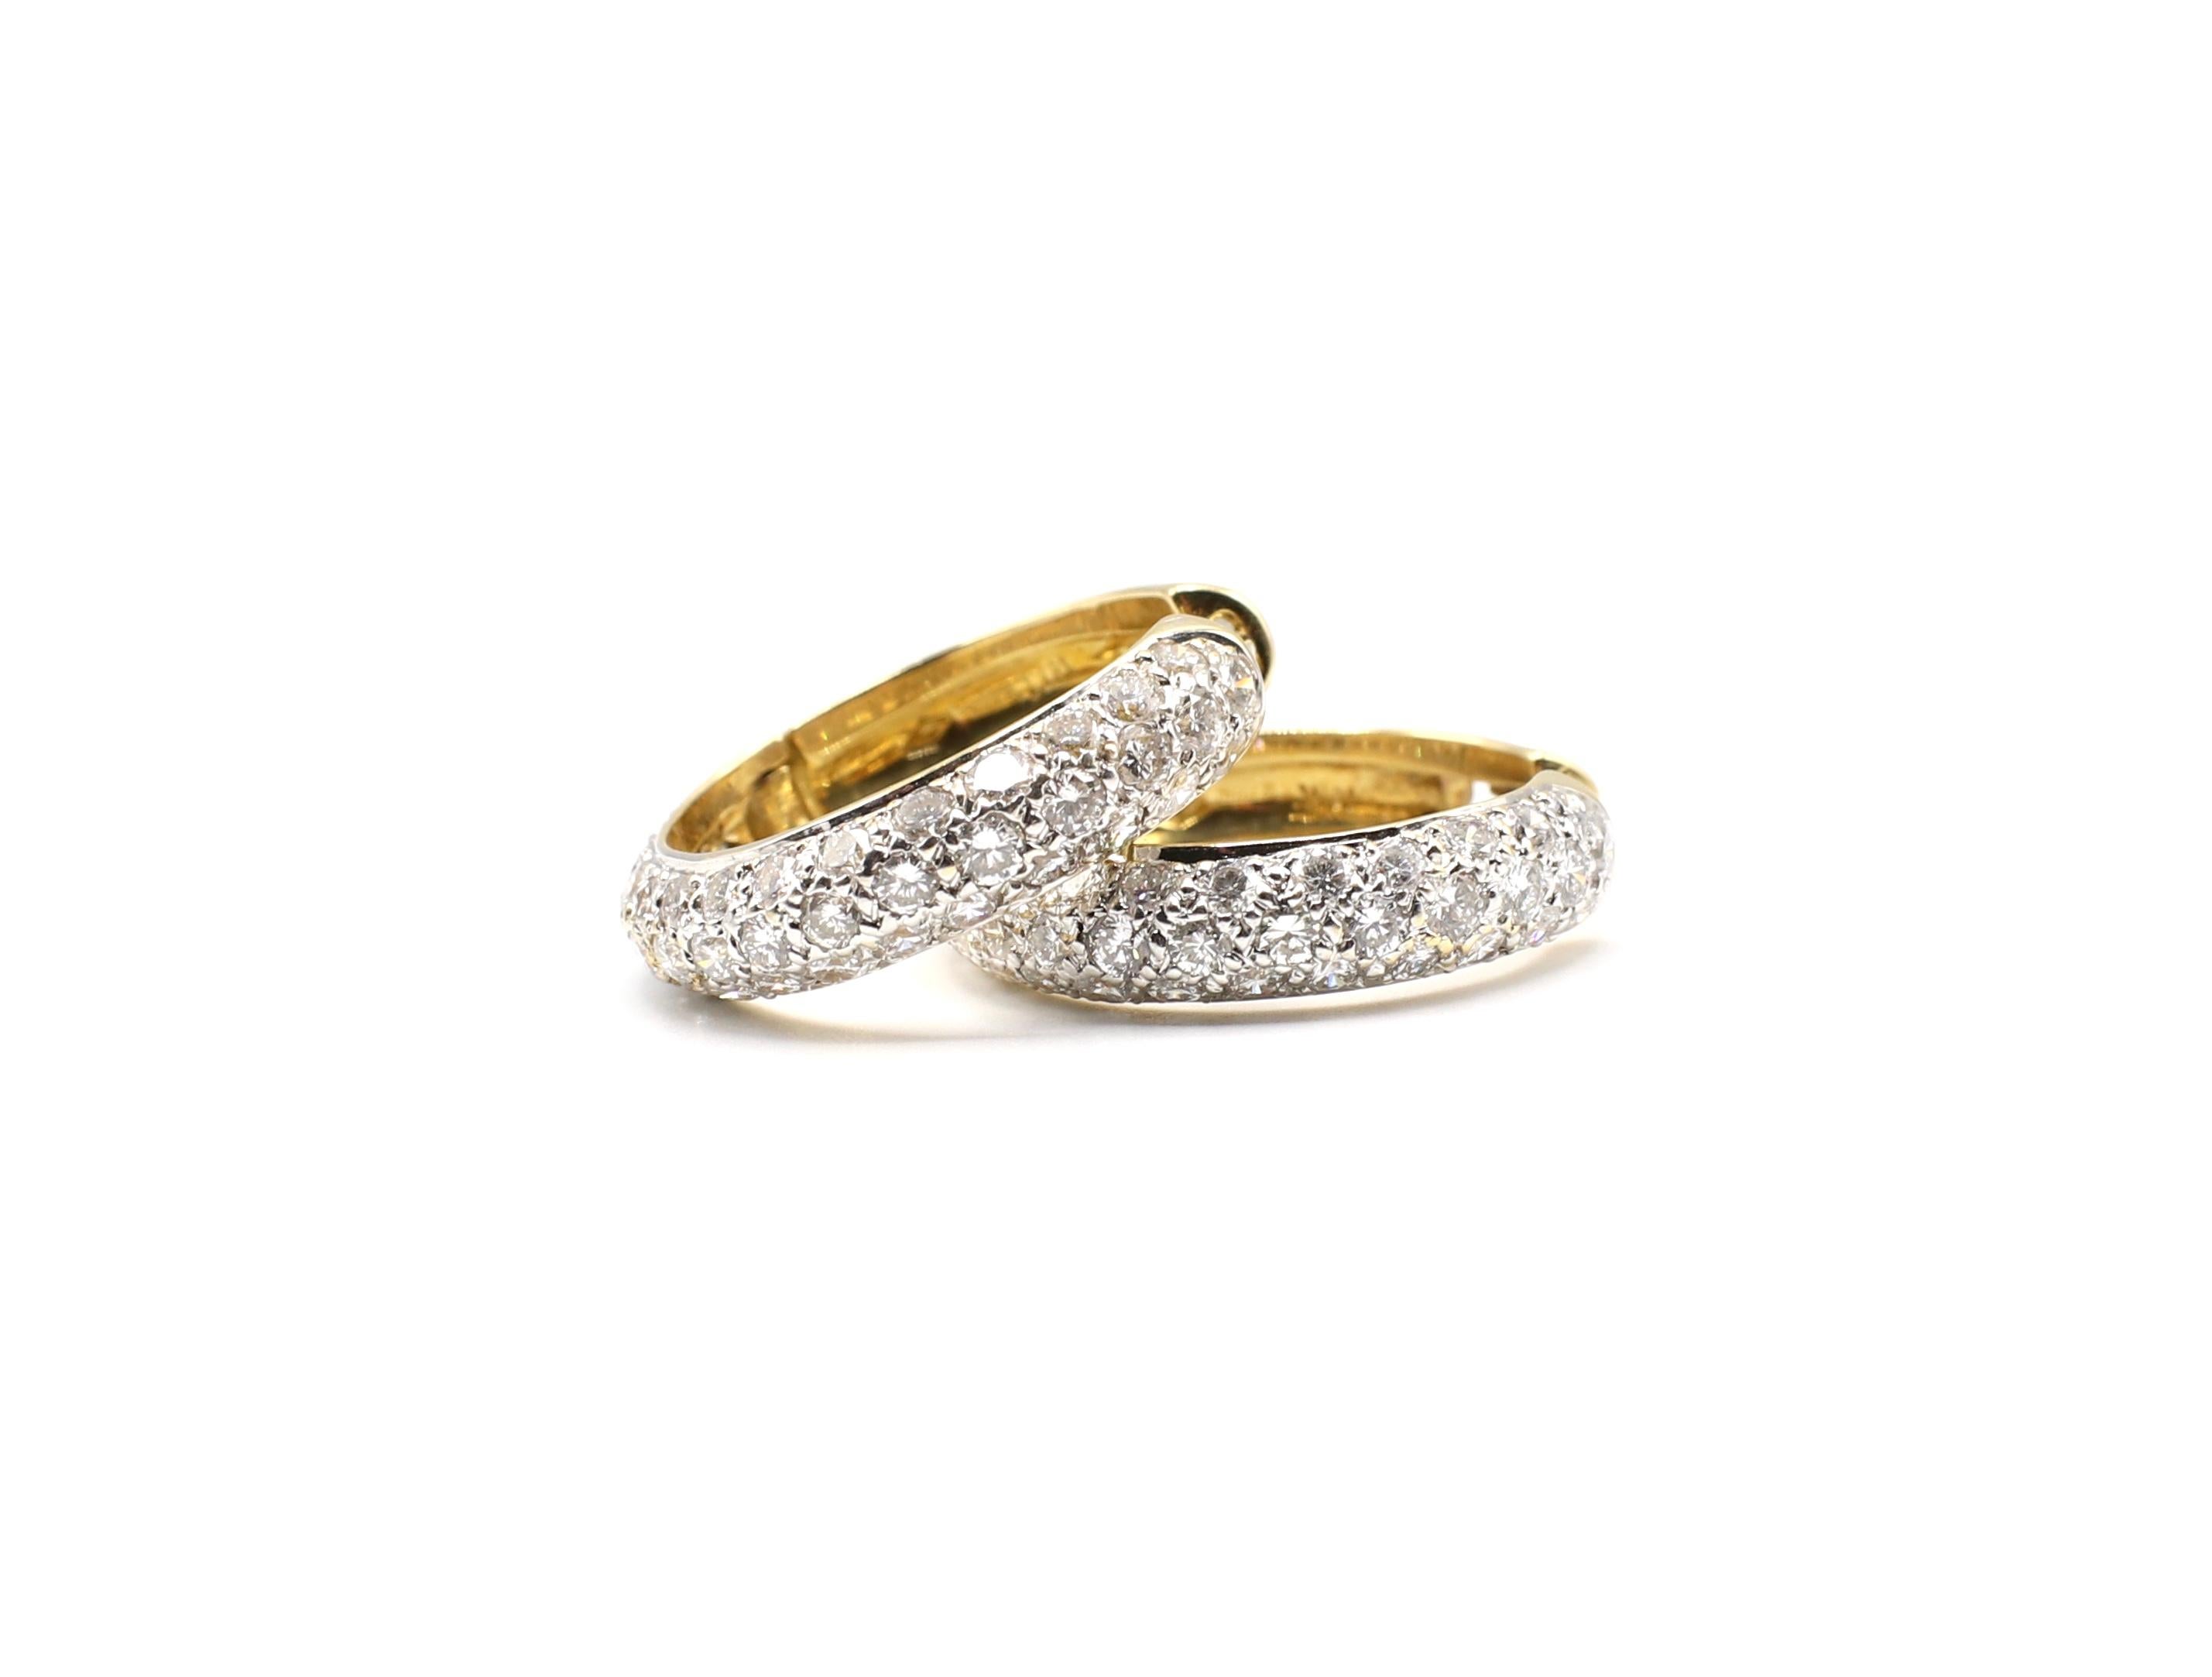 3 Carat Diamond 18 Karat Yellow Gold Hoop Drop Earrings 

Metal: 18K Yellow Gold 750
Weight: 9.5 grams
Earrings measure approx. 4.88mm thick and 21.4mm in diameter
86 round diamonds measure approx. 3.00 ctw color is G-H clarity is VS
Stamped: 